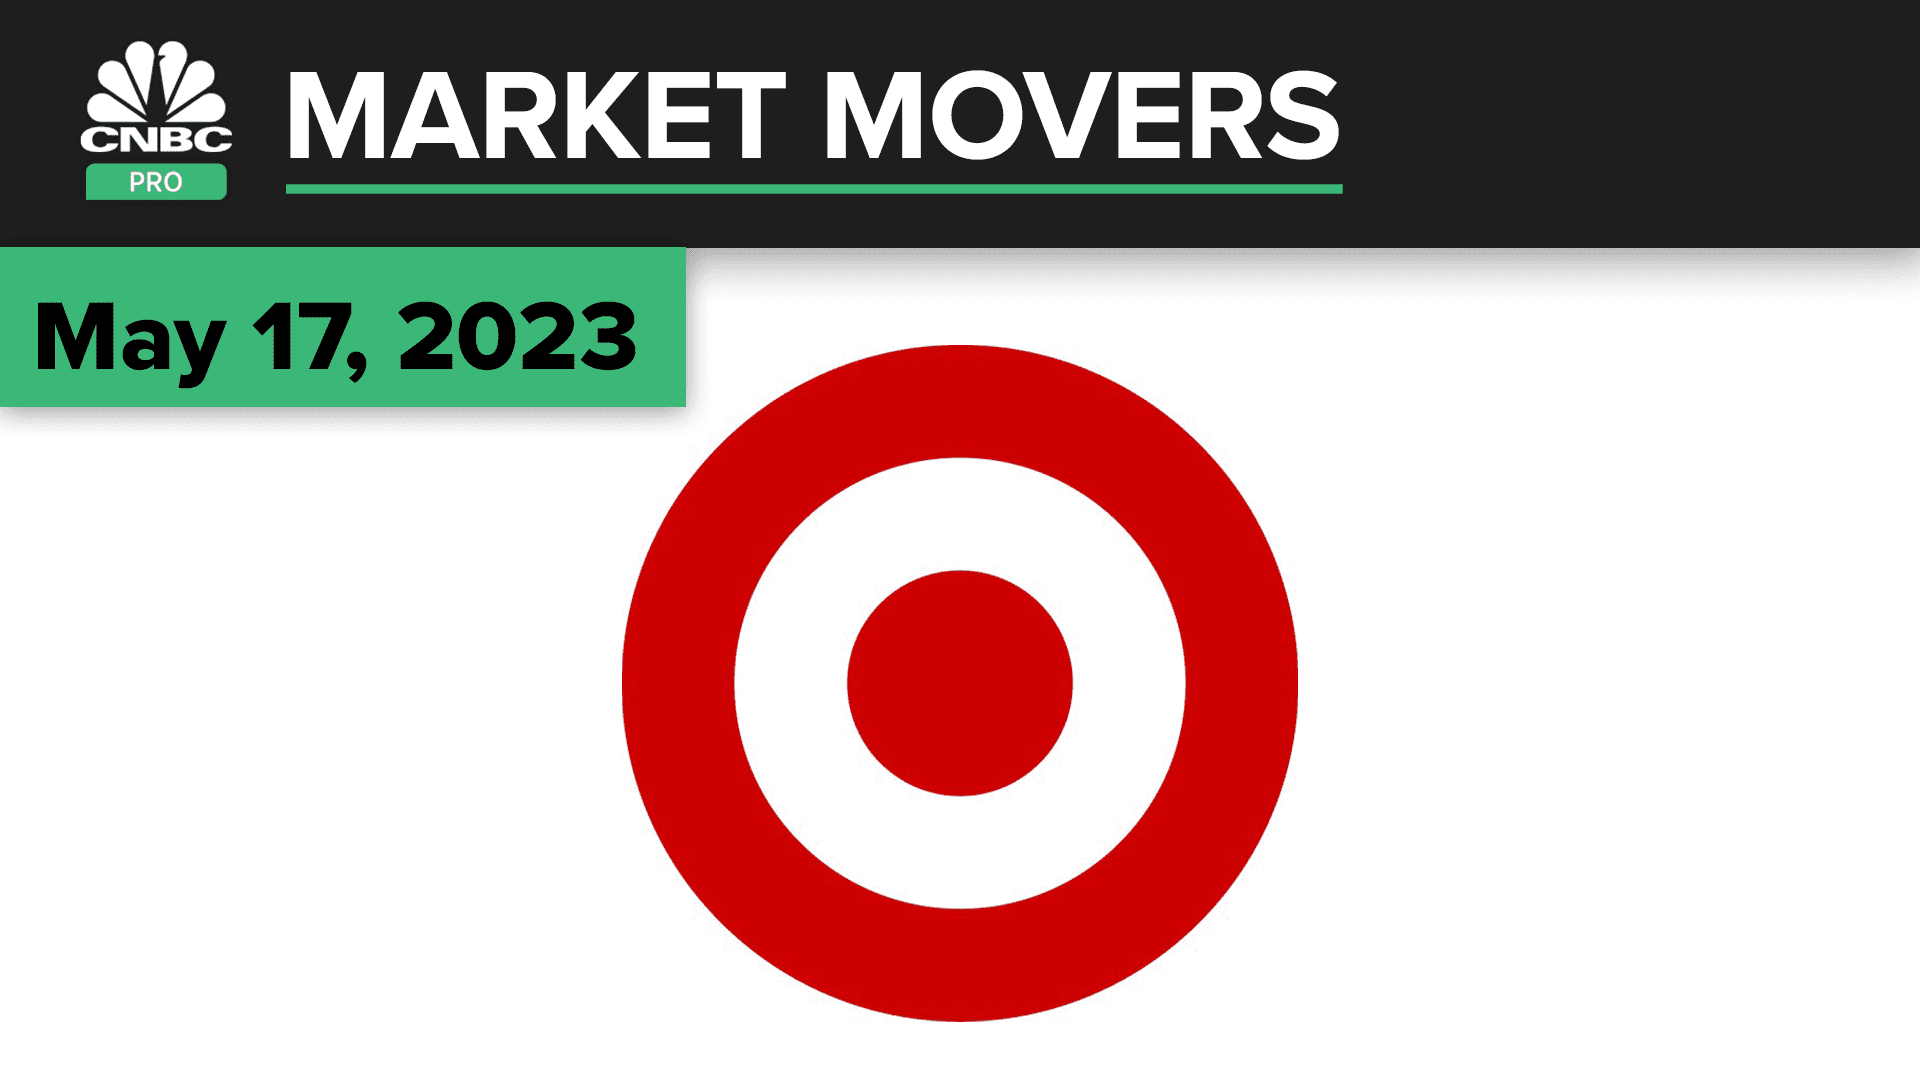 Target shares rise after earnings beat. Here's how the pros are playing it